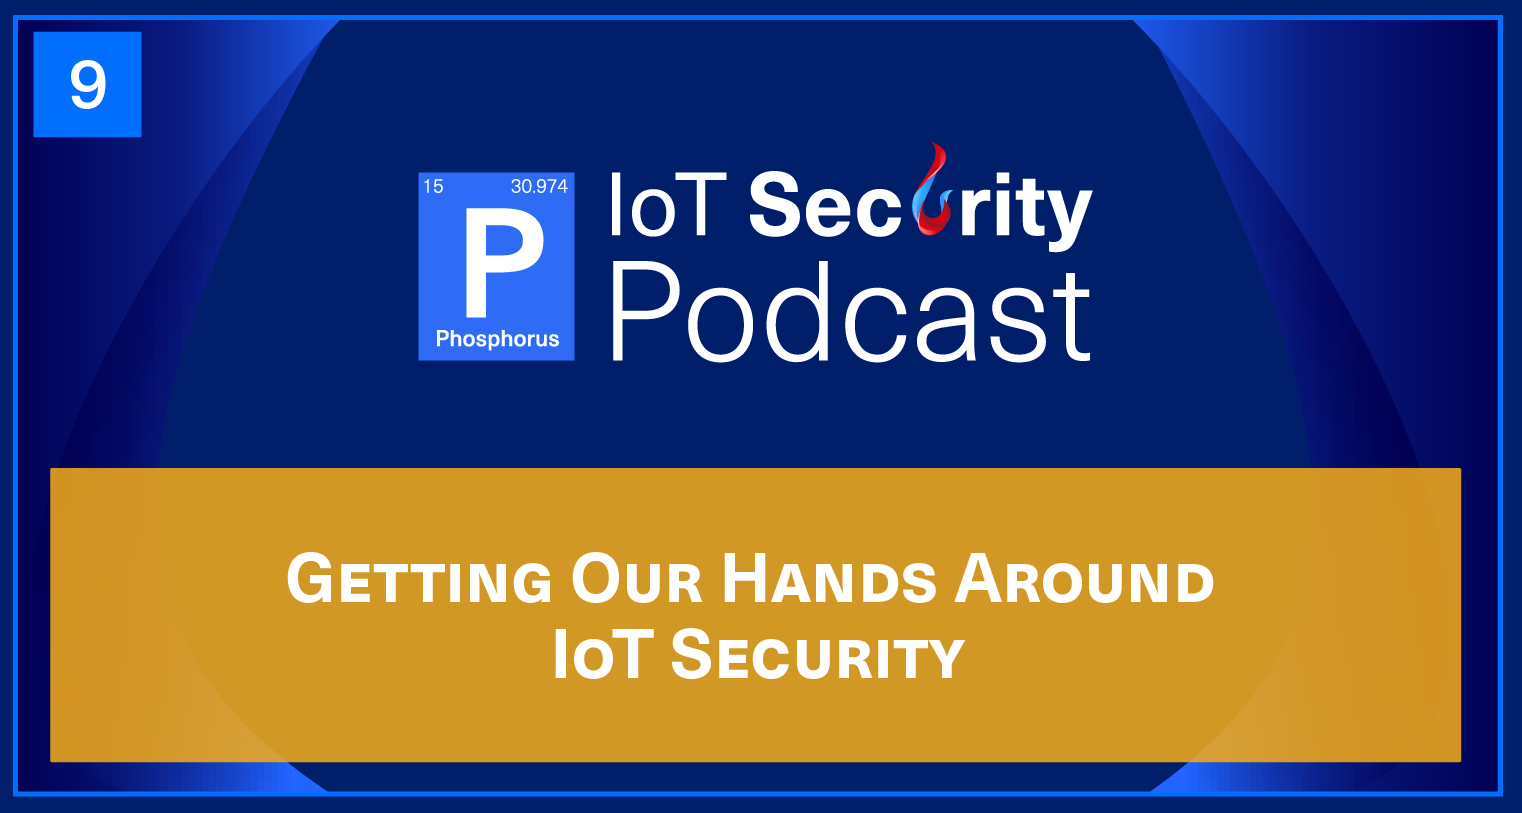 Getting Our Hands Around IoT Security: Dave Bang's Journey